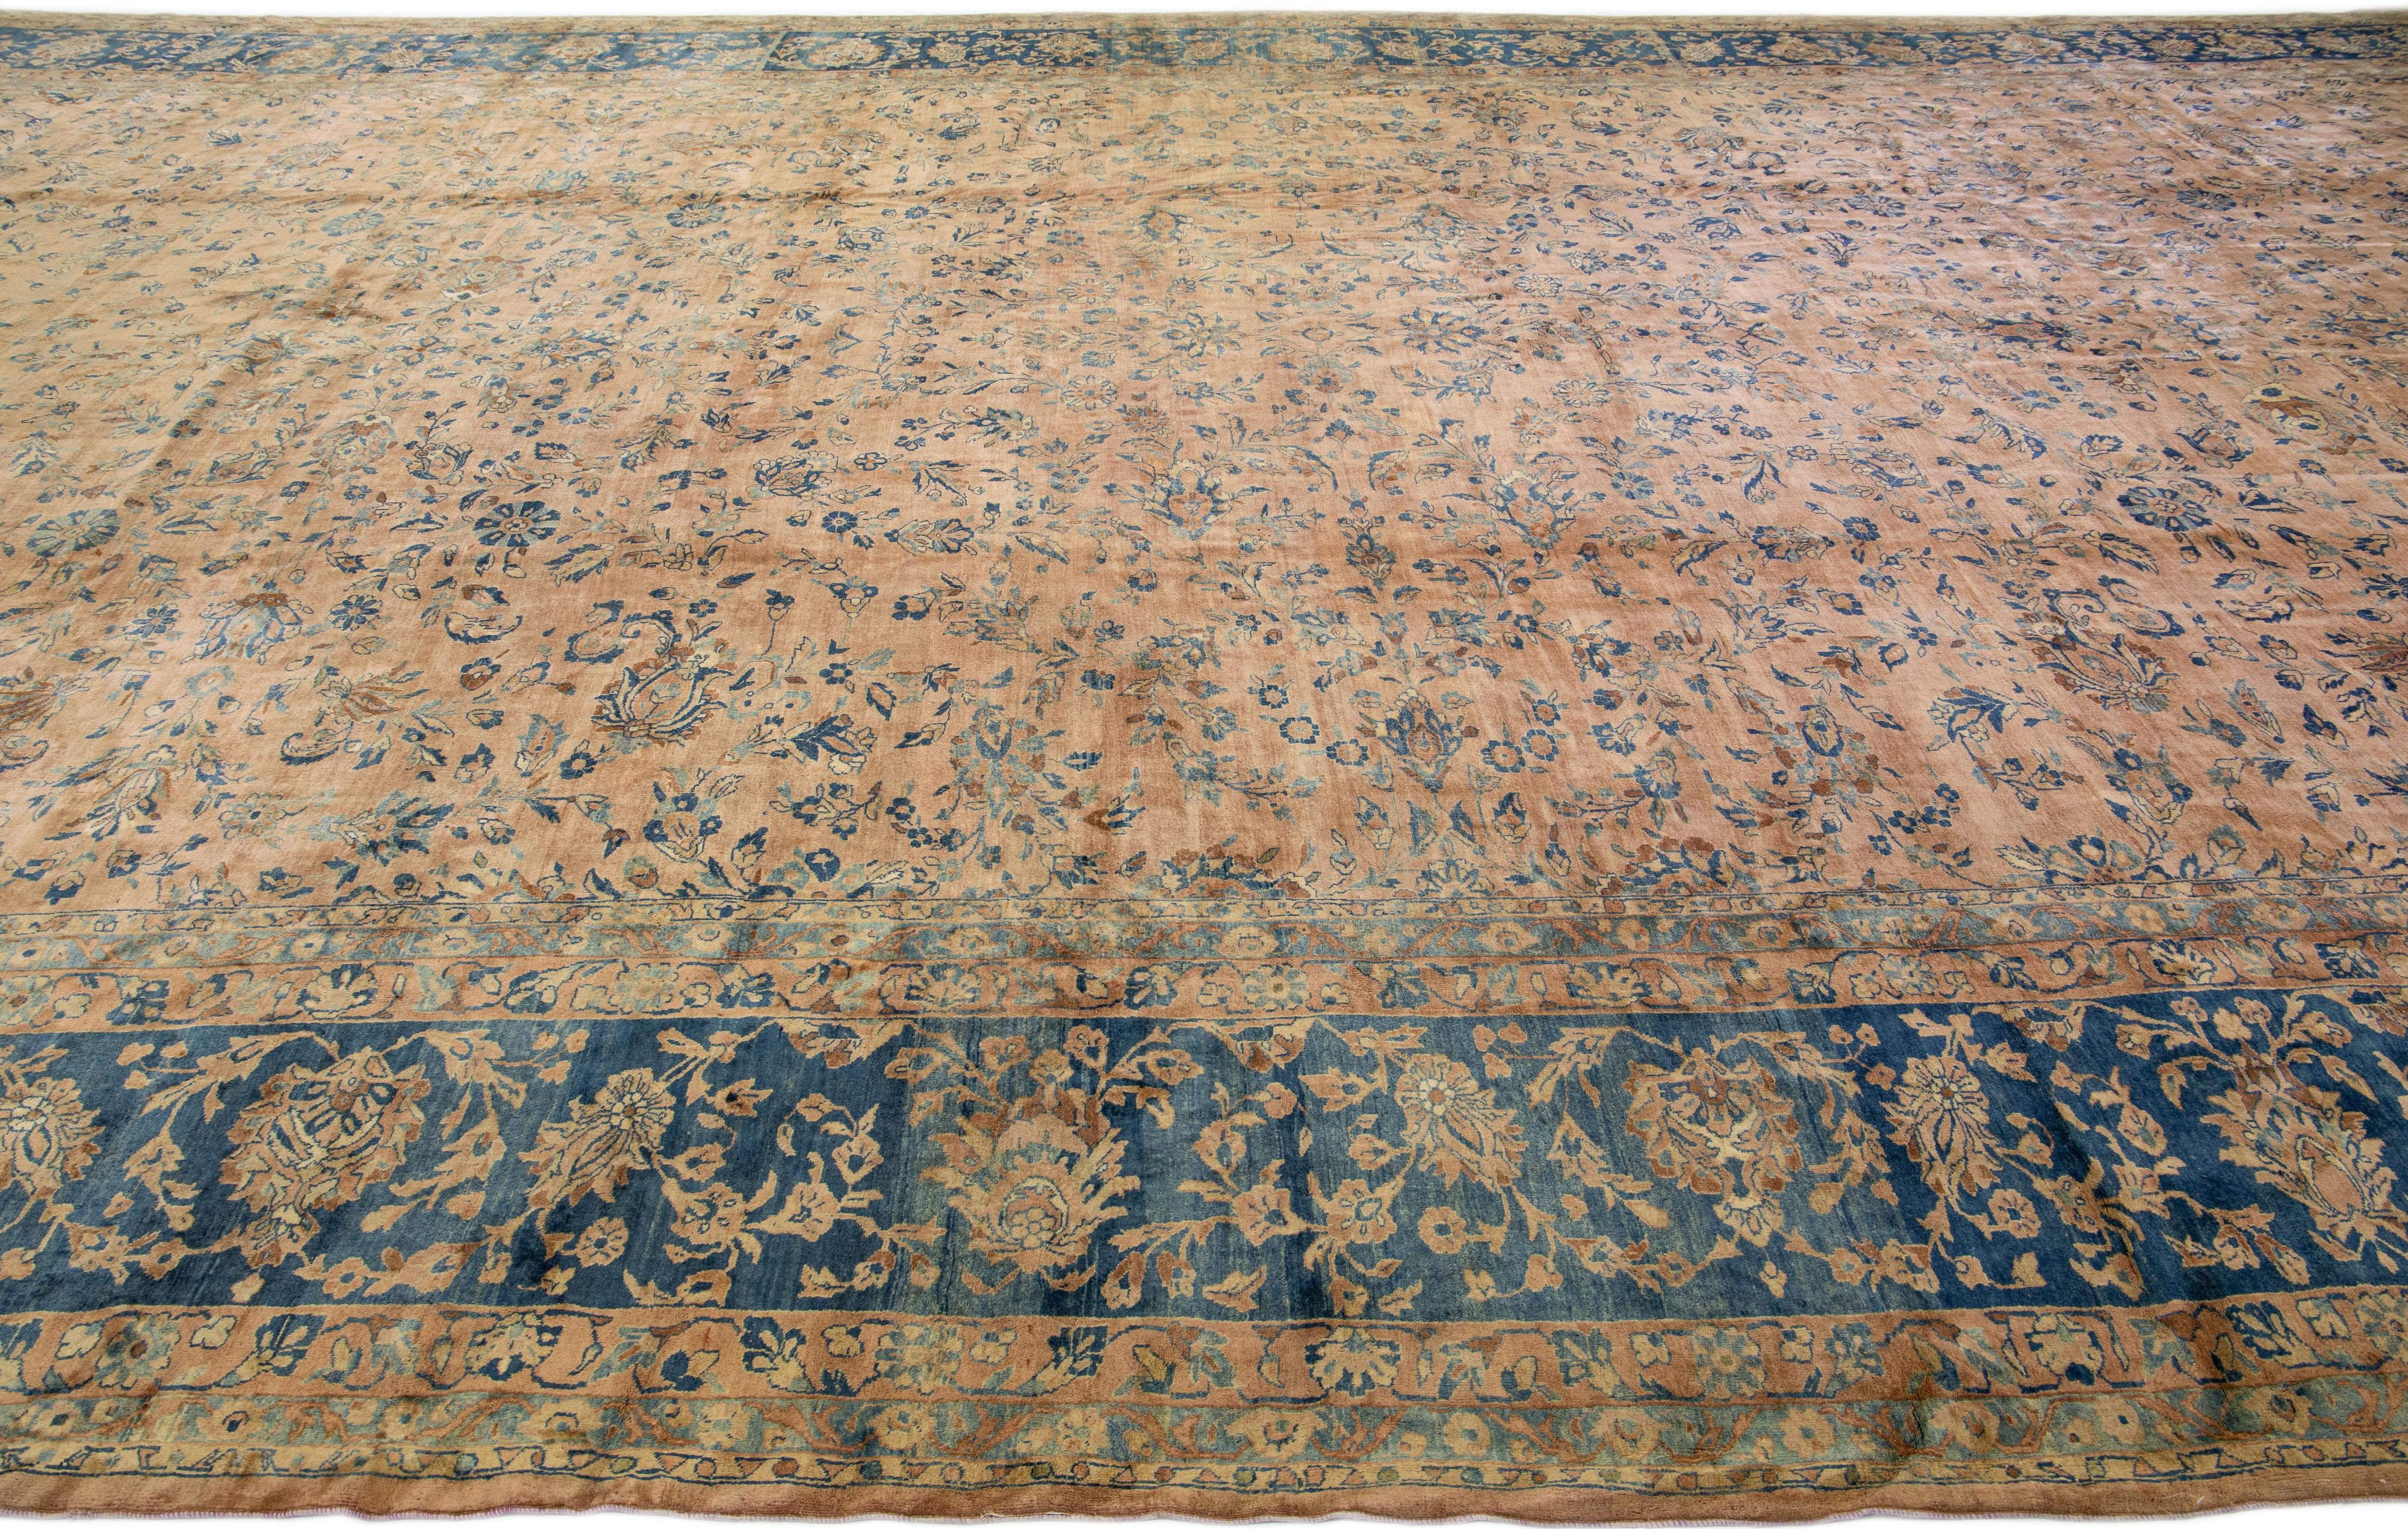 Tan Antique Tabriz Handmade Oversize Persian Wool Rug with Floral Design In Good Condition For Sale In Norwalk, CT